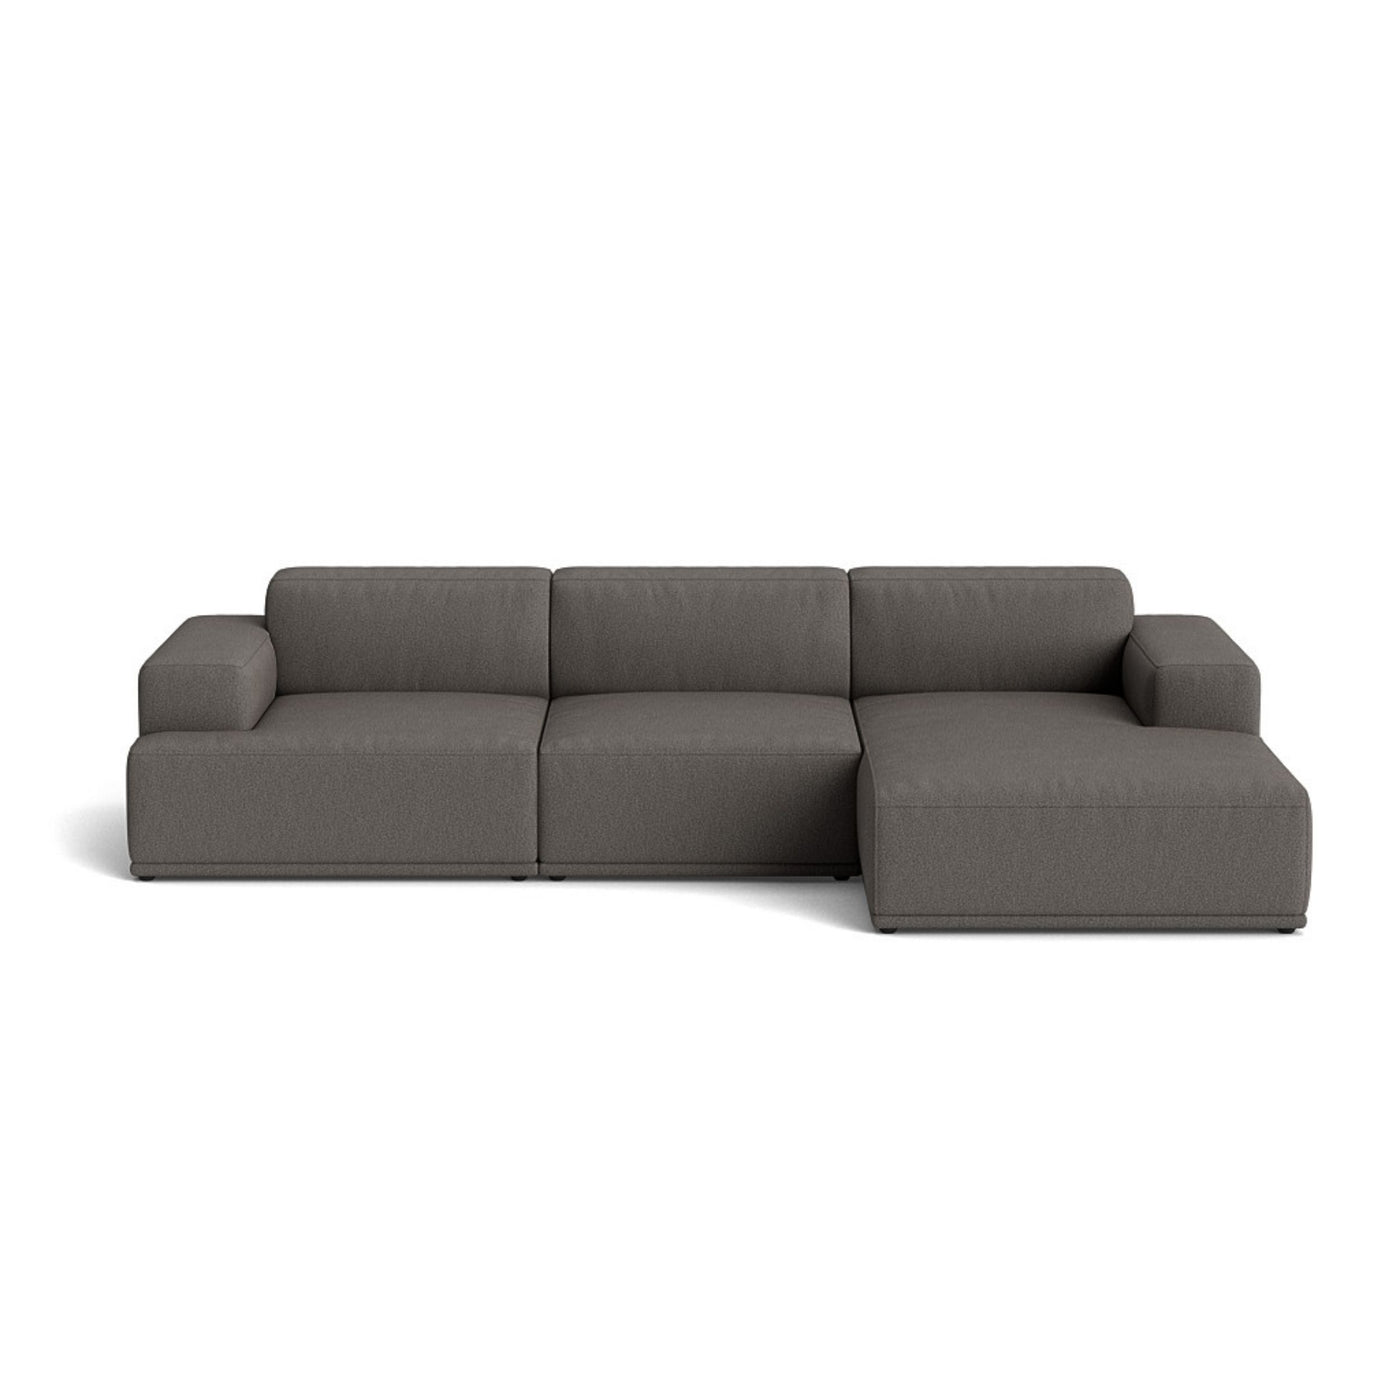 Muuto Connect Soft Modular 3 Seater Sofa, configuration 3. Made-to-order from someday designs. #colour_clay-9